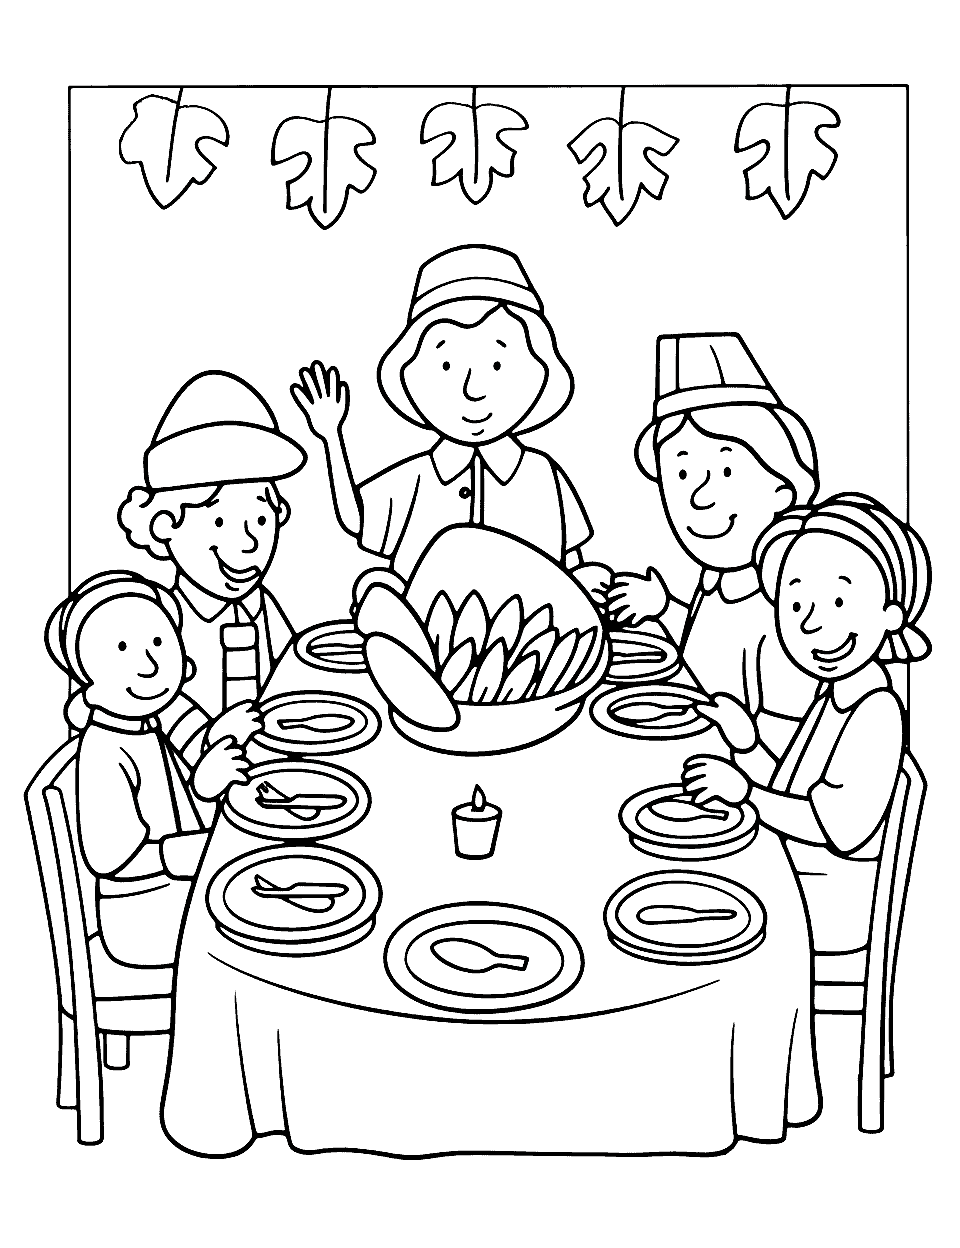 Thanksgiving coloring pages free printable sheets